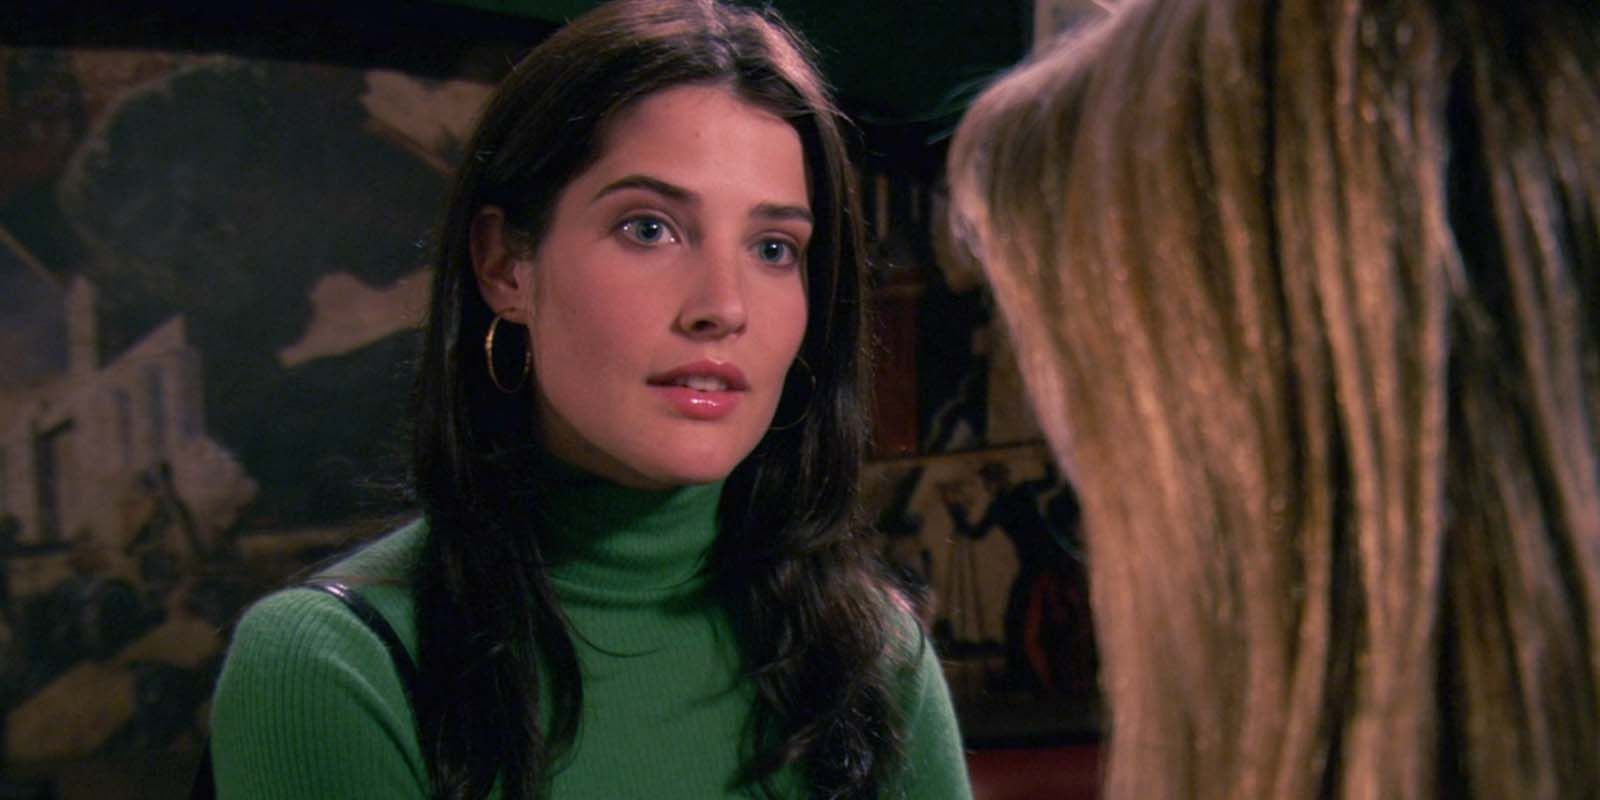 Cobie Smulders Smiling and Talking to a Blonde as Robin in How I Met Your Mother Season 1 Episode 1